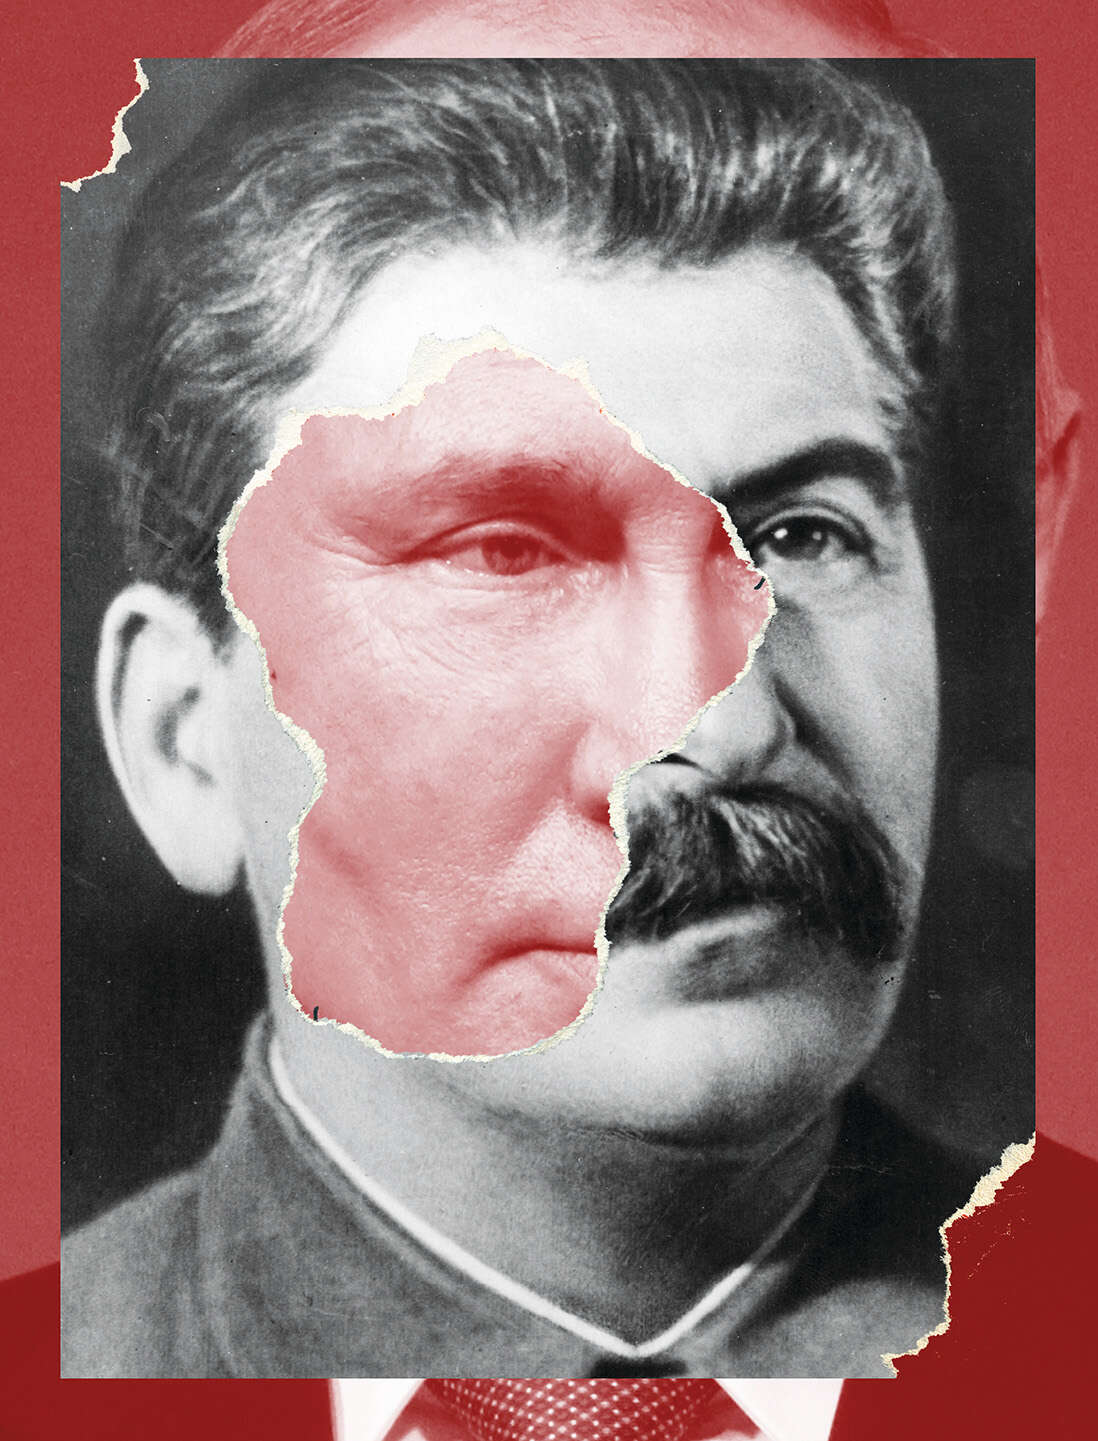 Stalin and Putin: a tale of two dictators - Audio Long Reads